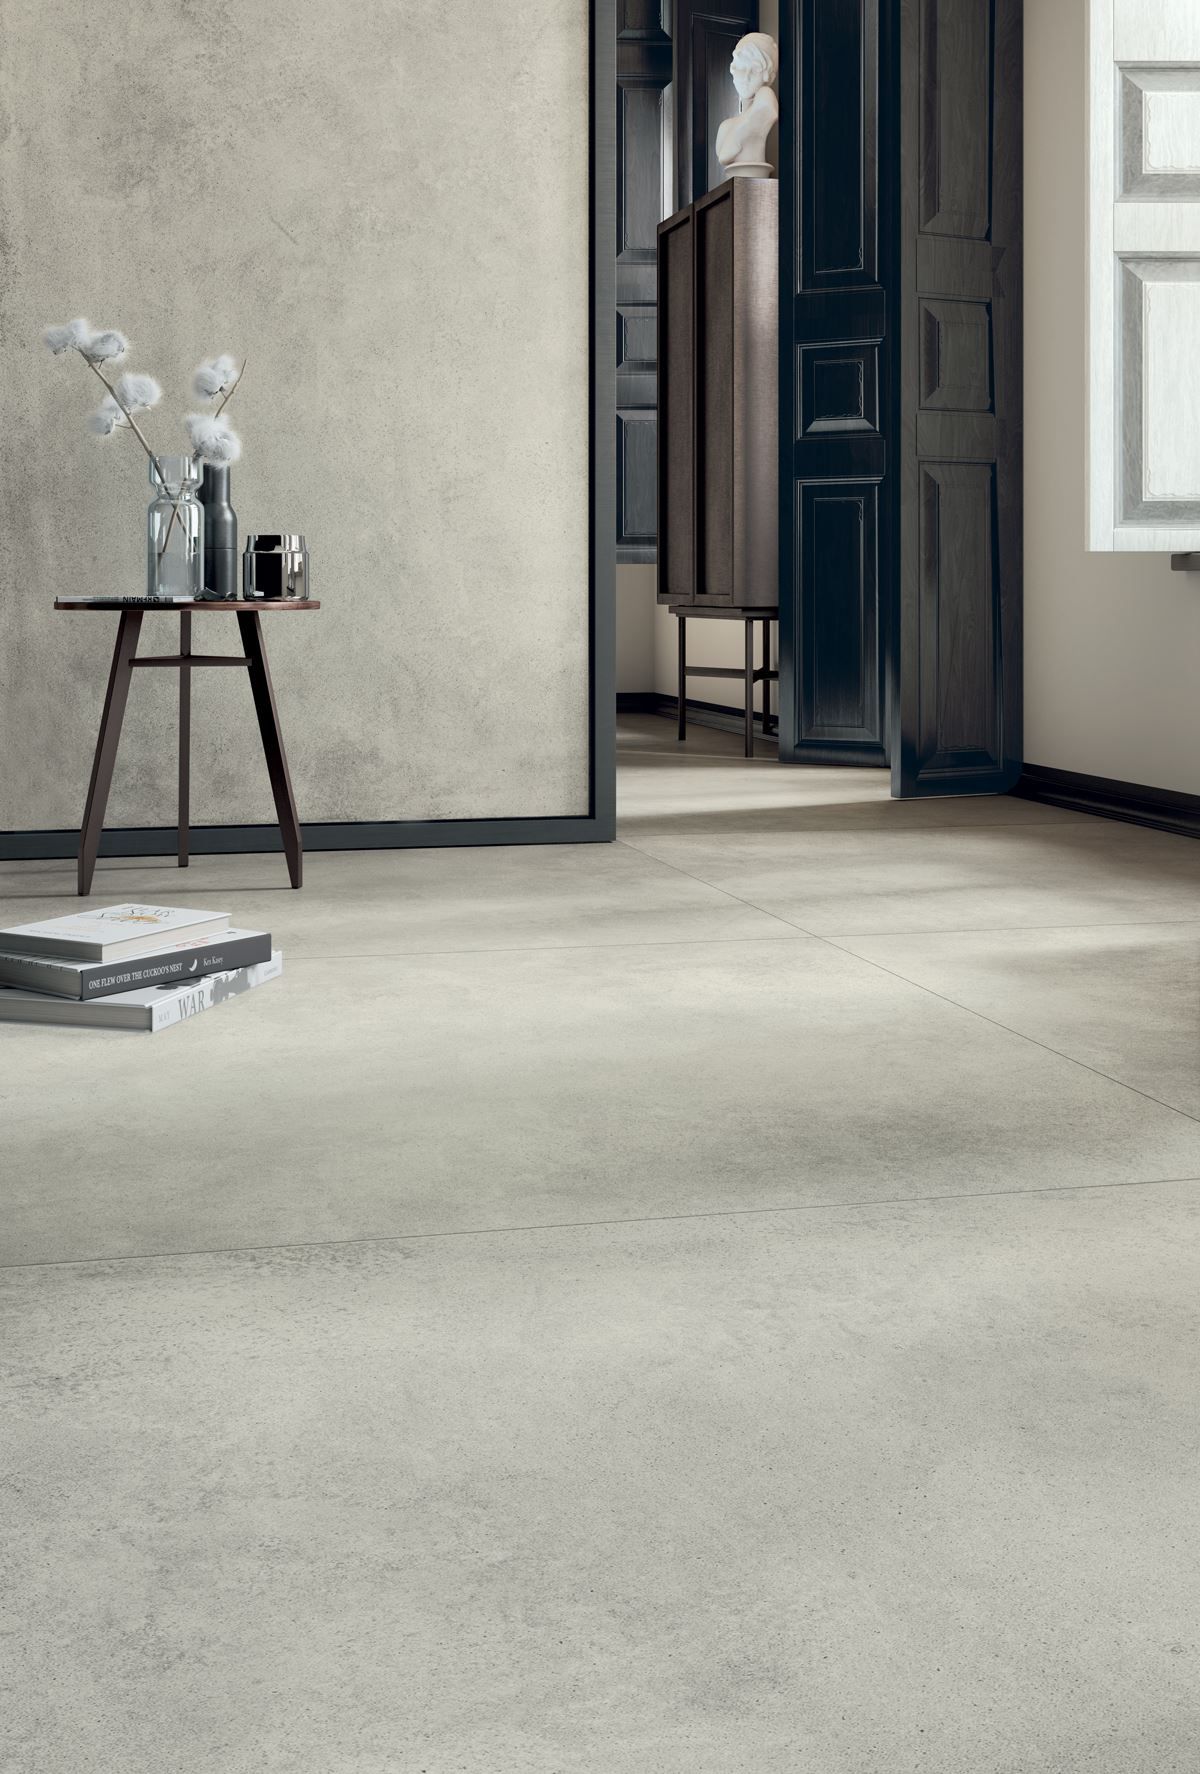 GRUNGE TAUPE Naturale floor 60x120